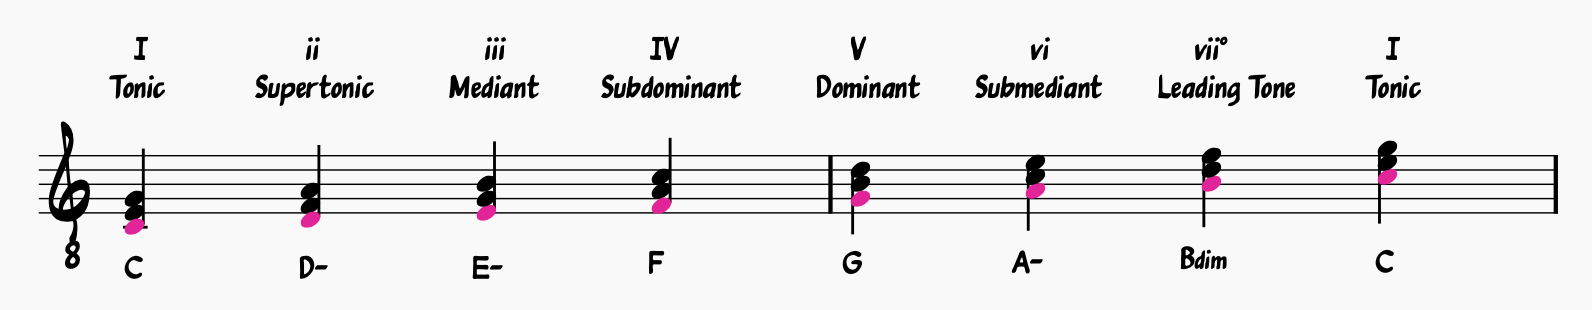 Chord Melody Basics: Diatonic triads in the key of C major